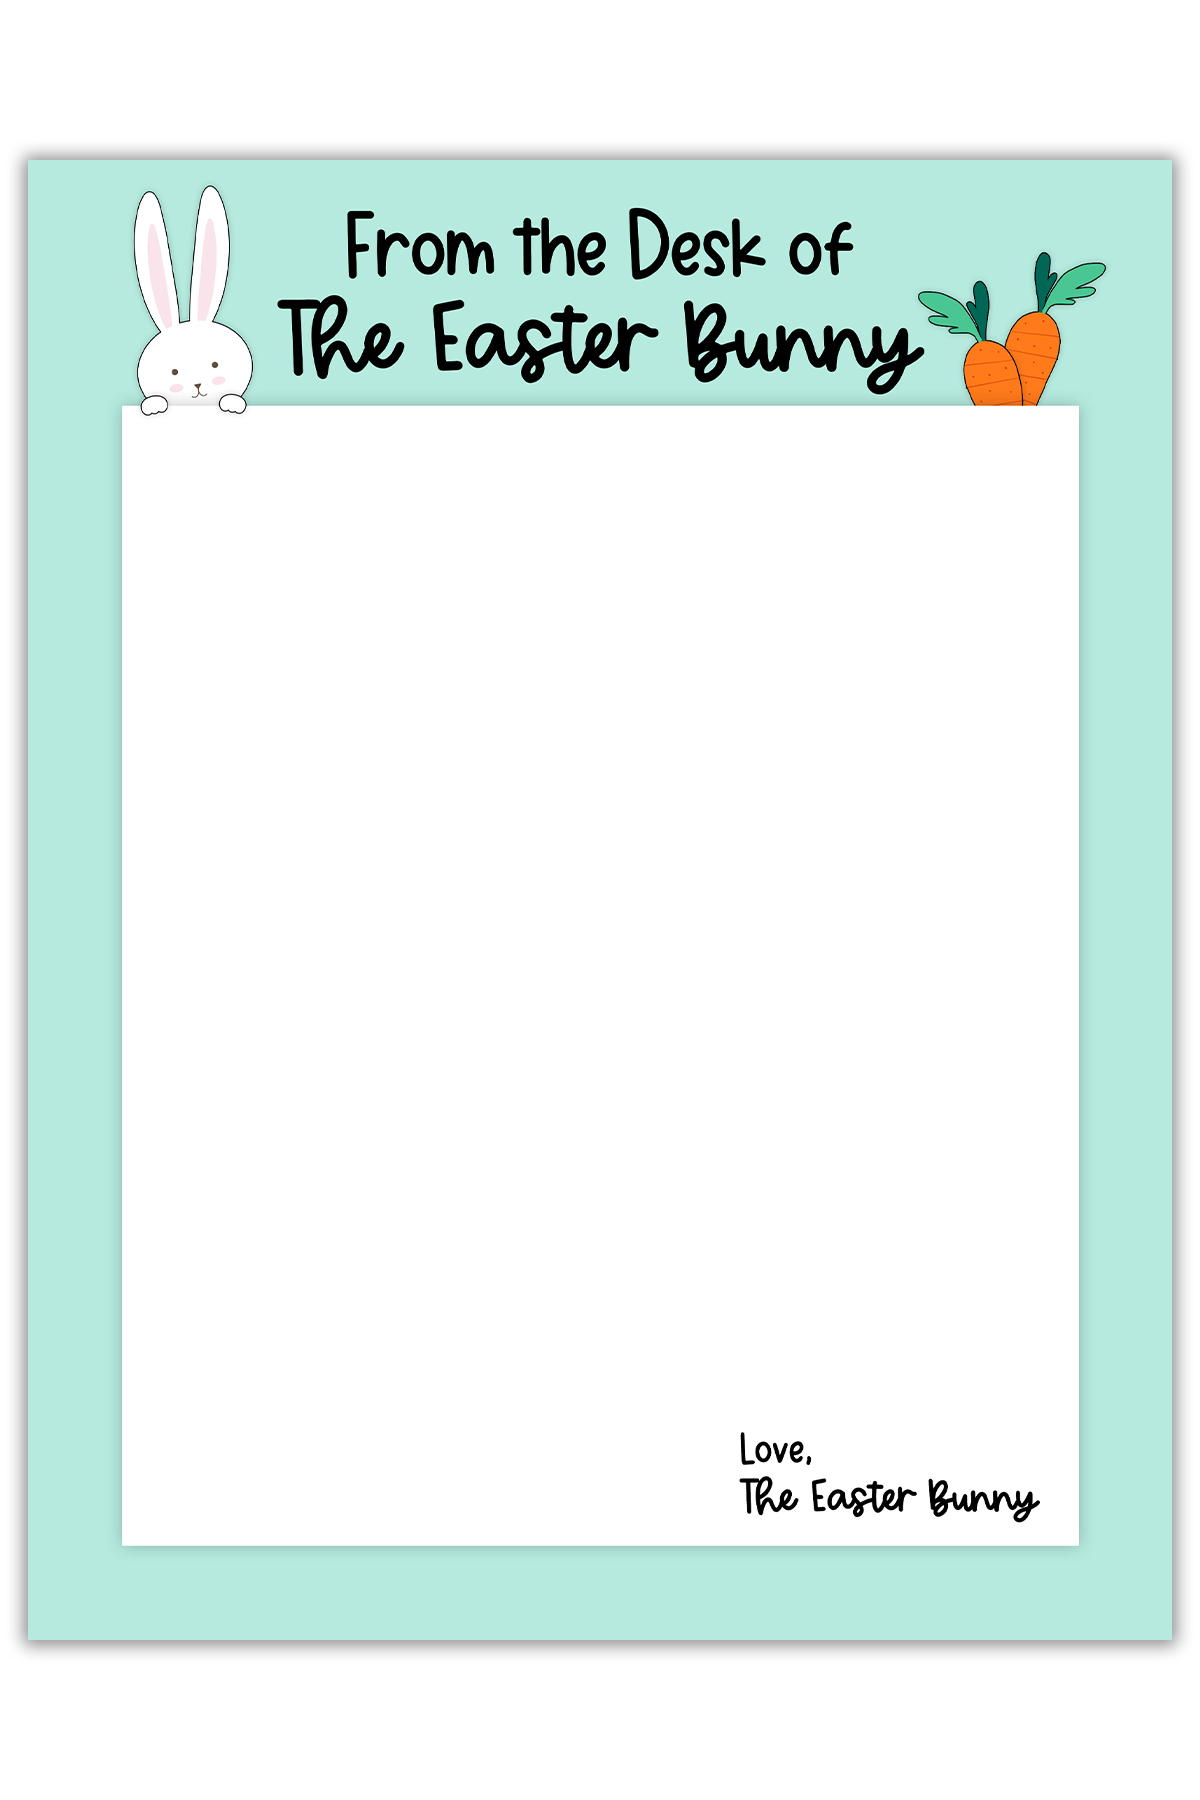 This is an image of one of the free Easter bunny note printables you can download in this post. It shows the note with the words From the Desk of the Easter Bunny at the top.